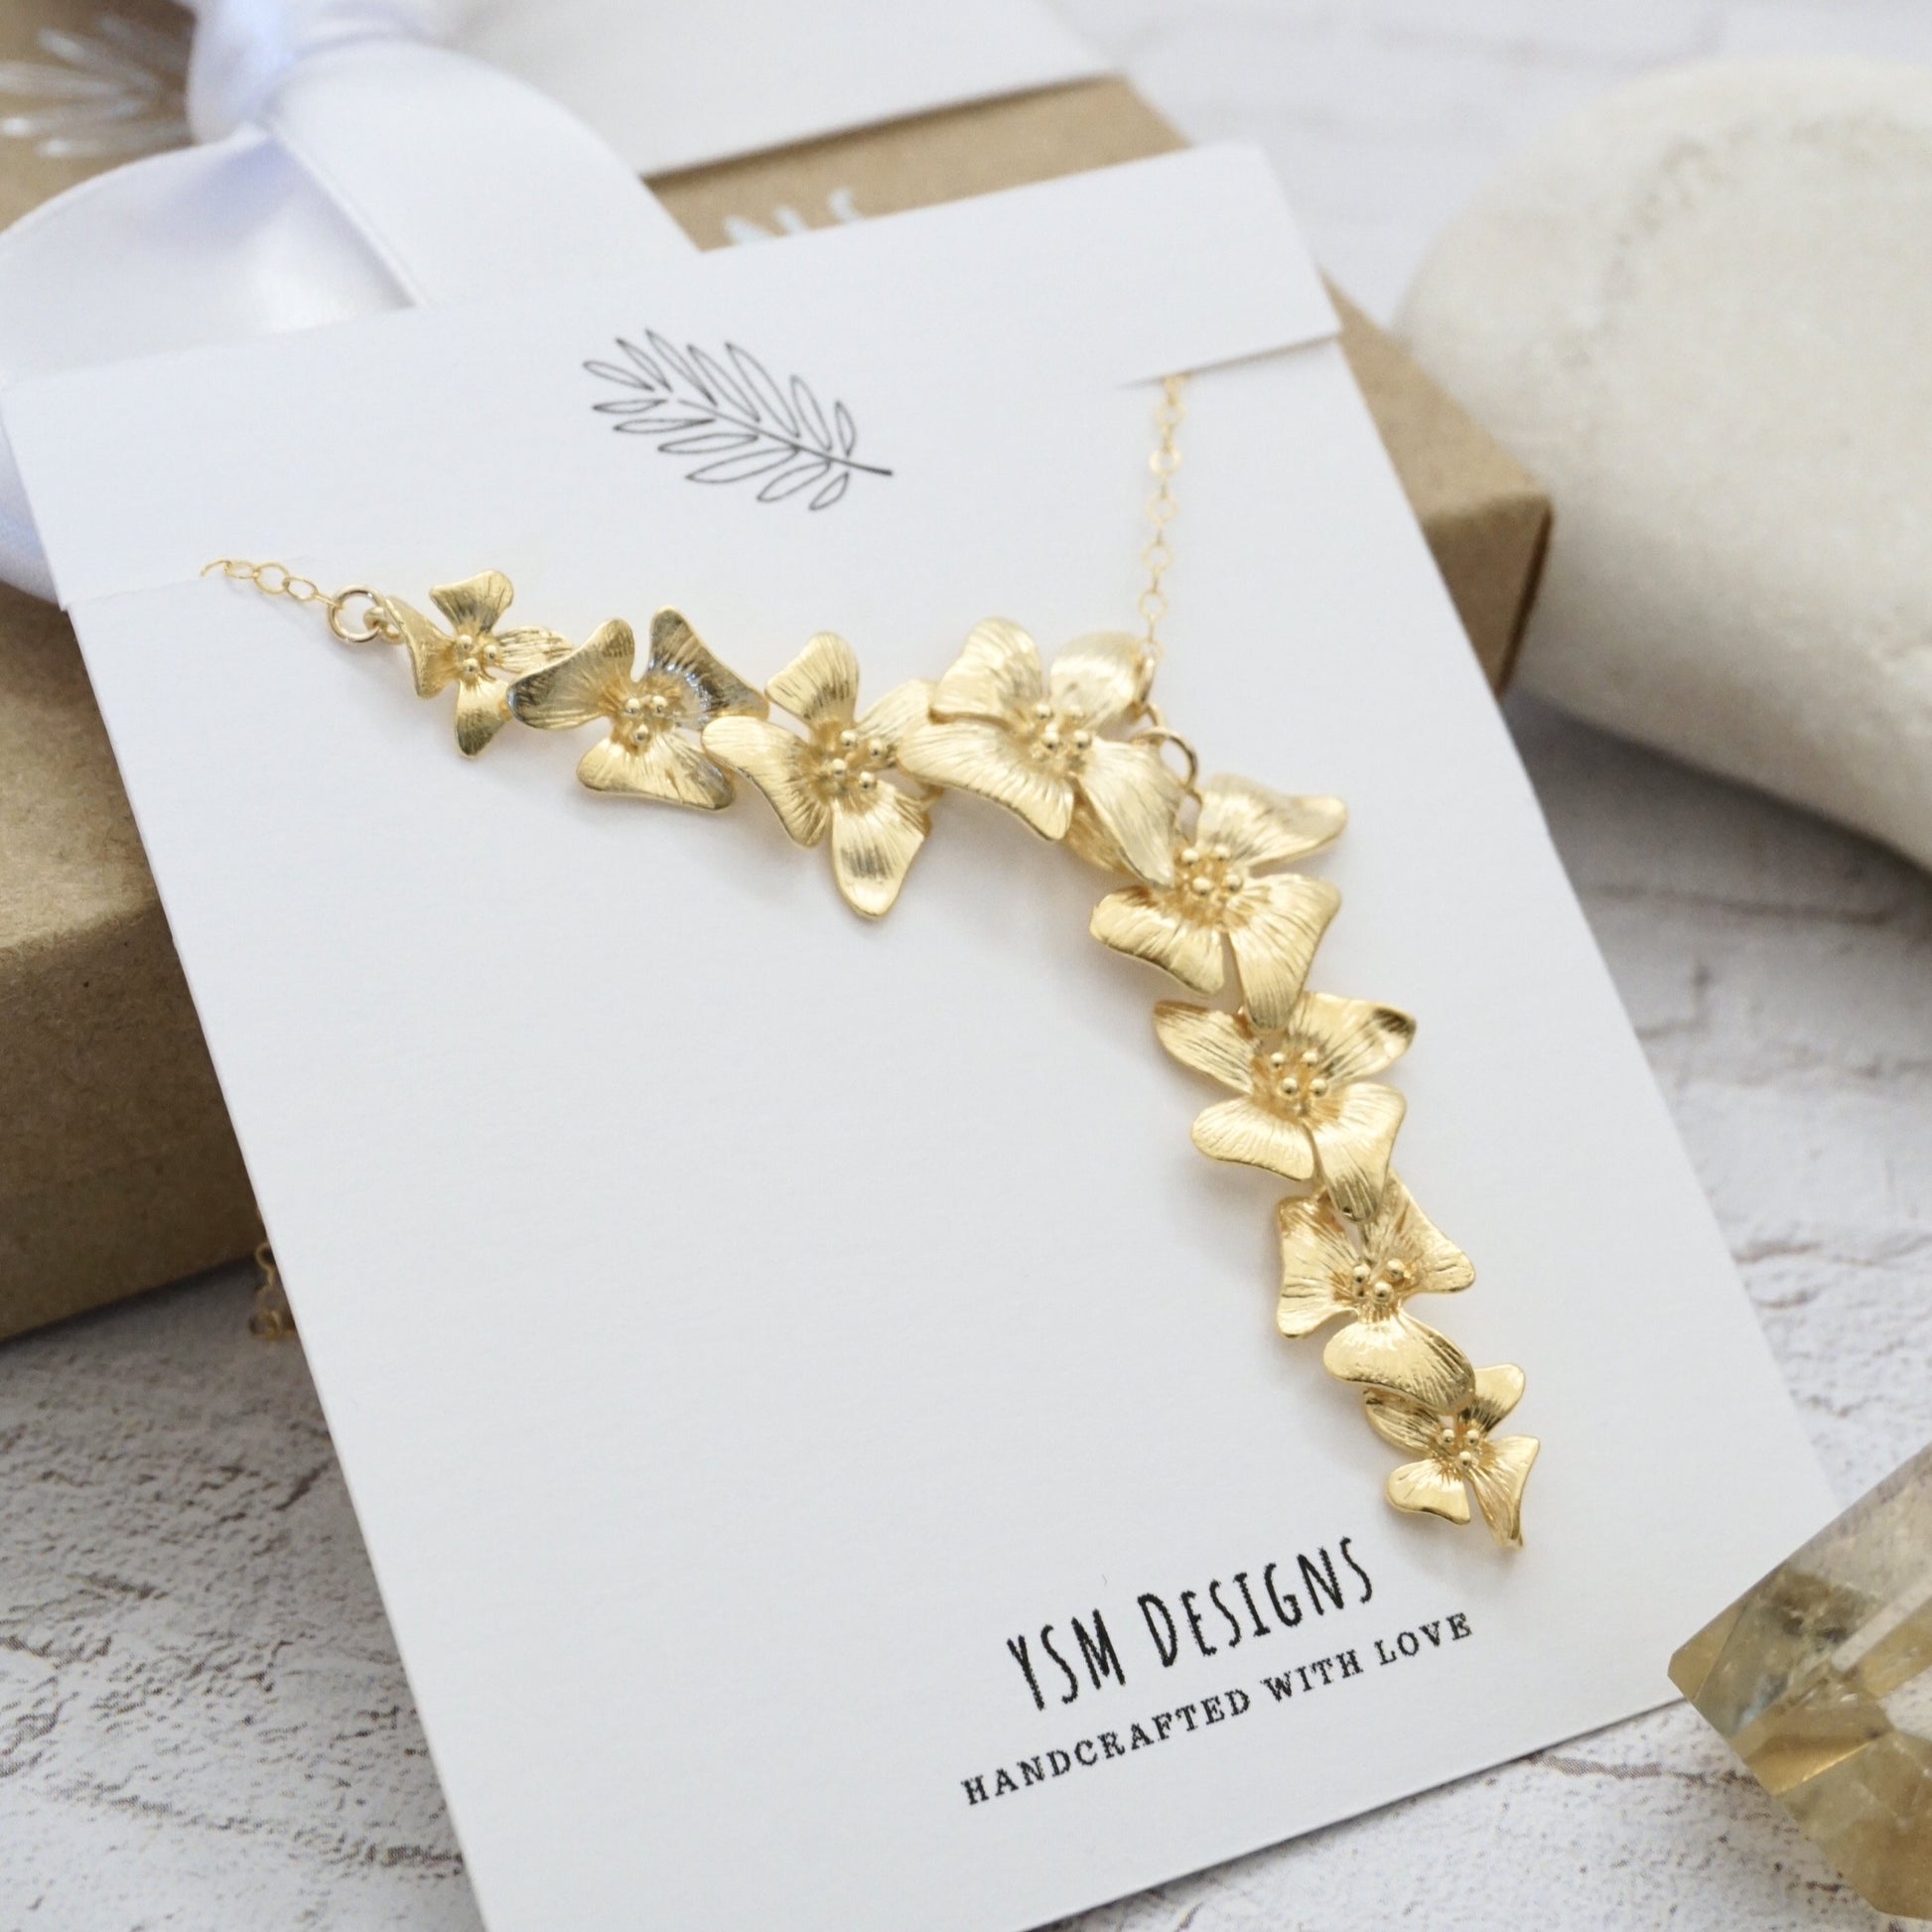 Gold floral necklace by YSM Designs